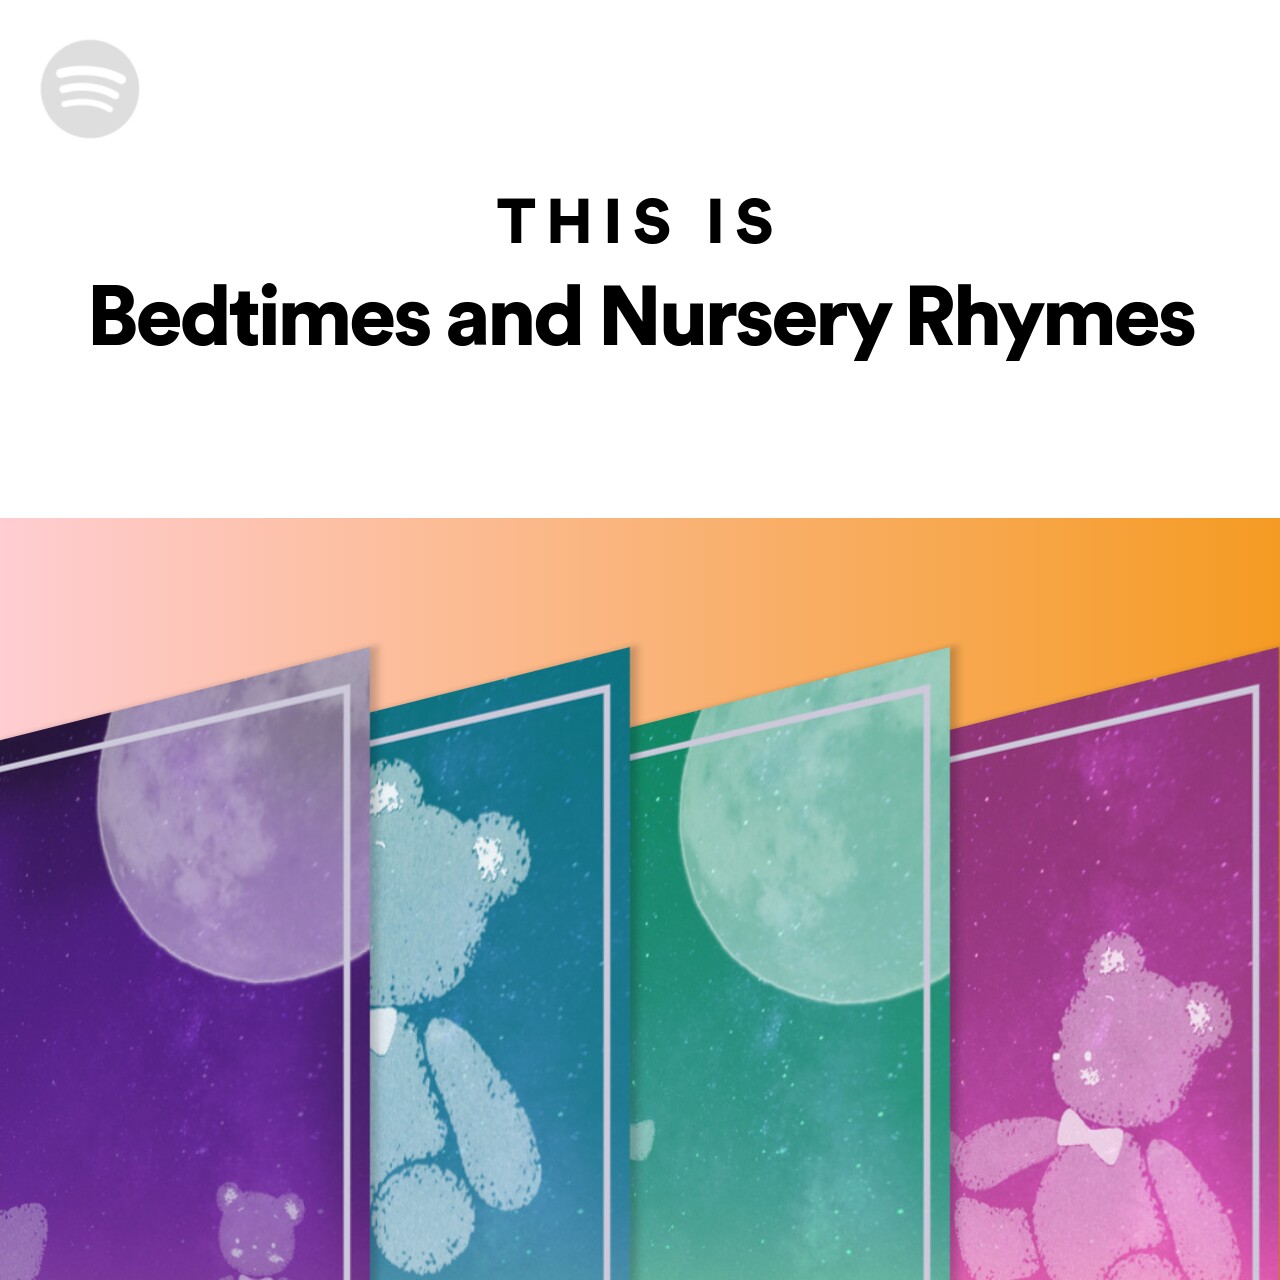 This Is Bedtimes and Nursery Rhymes